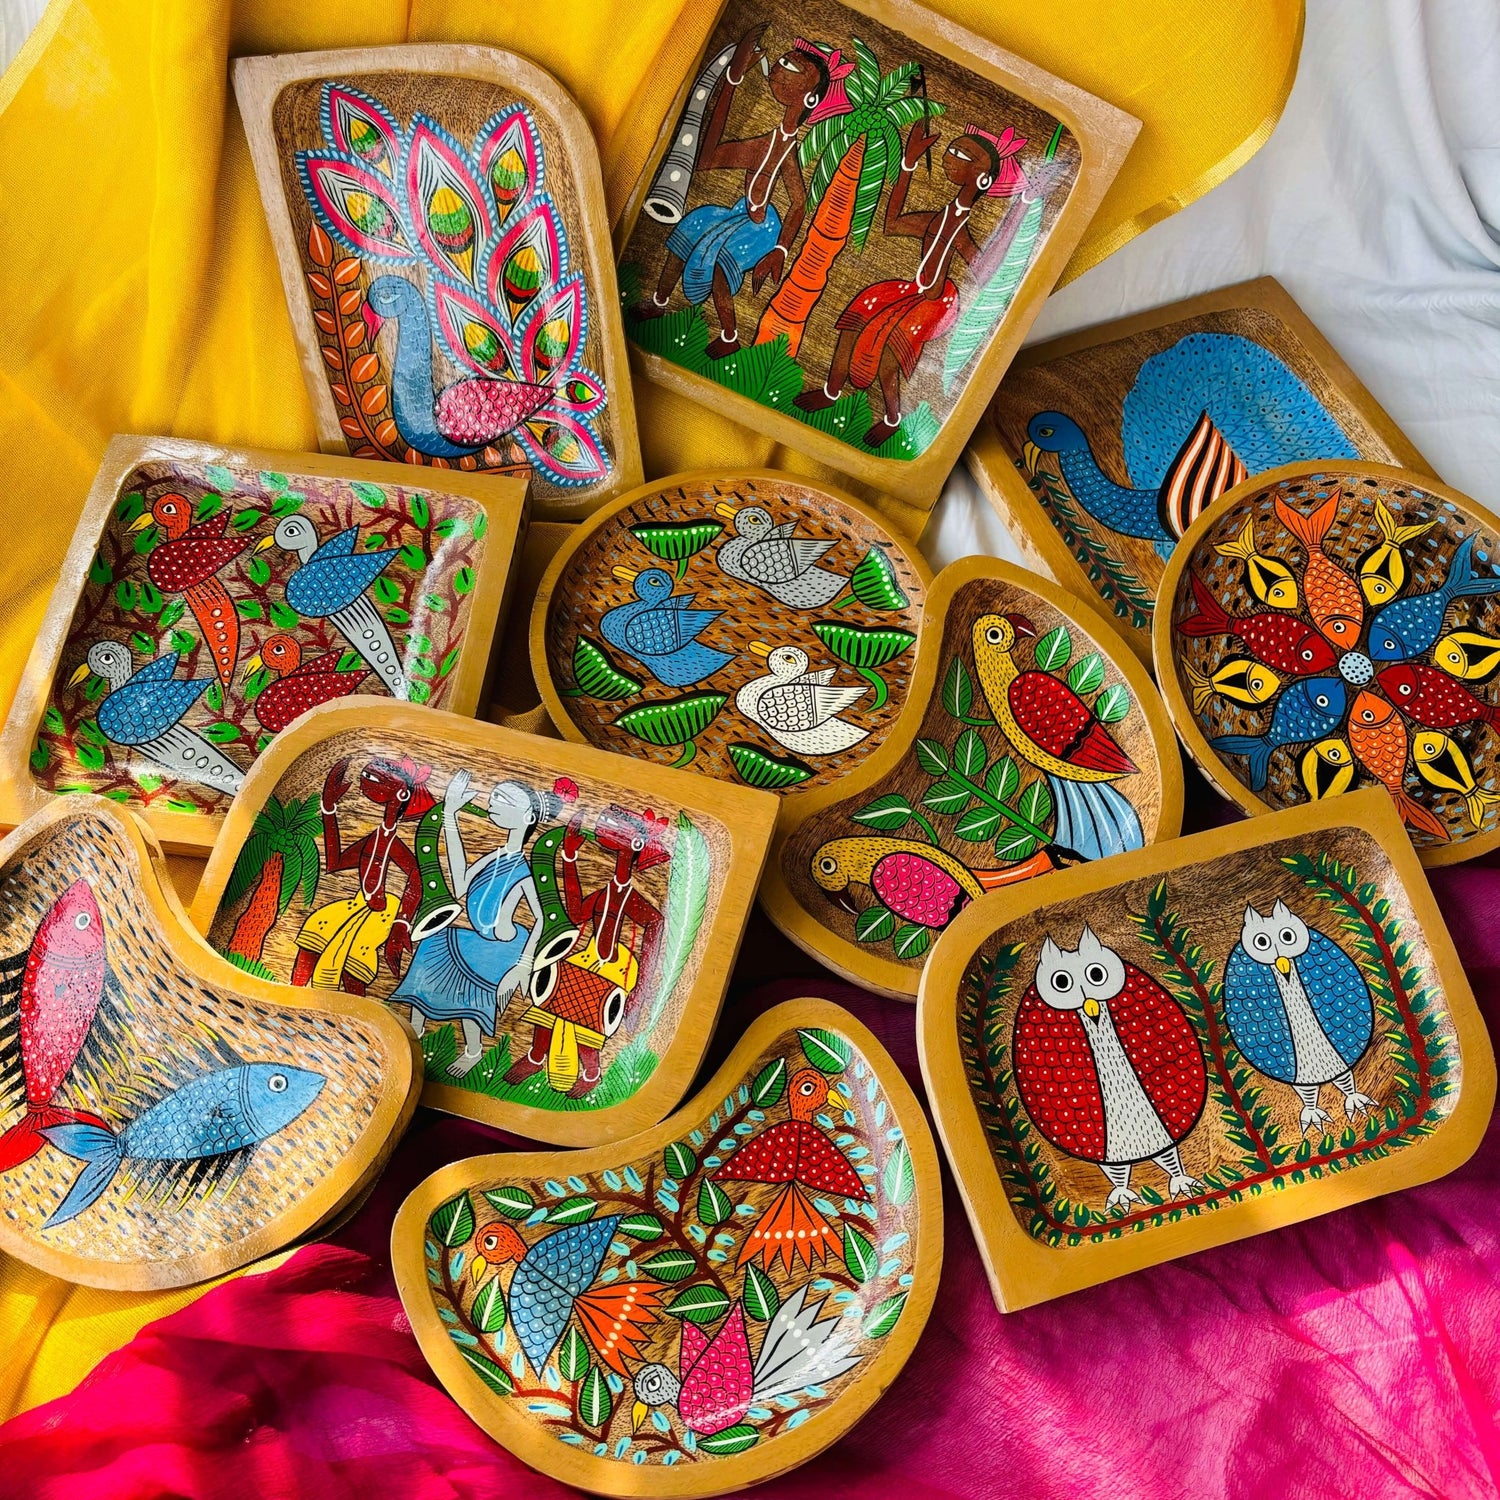 Three round wooden tea trays, two square wood trays, three rectangular wooden trays and three moon-shaped wooden serving trays or trinket trays featuring Indian folk art, West Bengal Pattachitra paintings of four birds, two peacocks, two fish, one owl, and two tribal motifs, inspired from Indian folklore